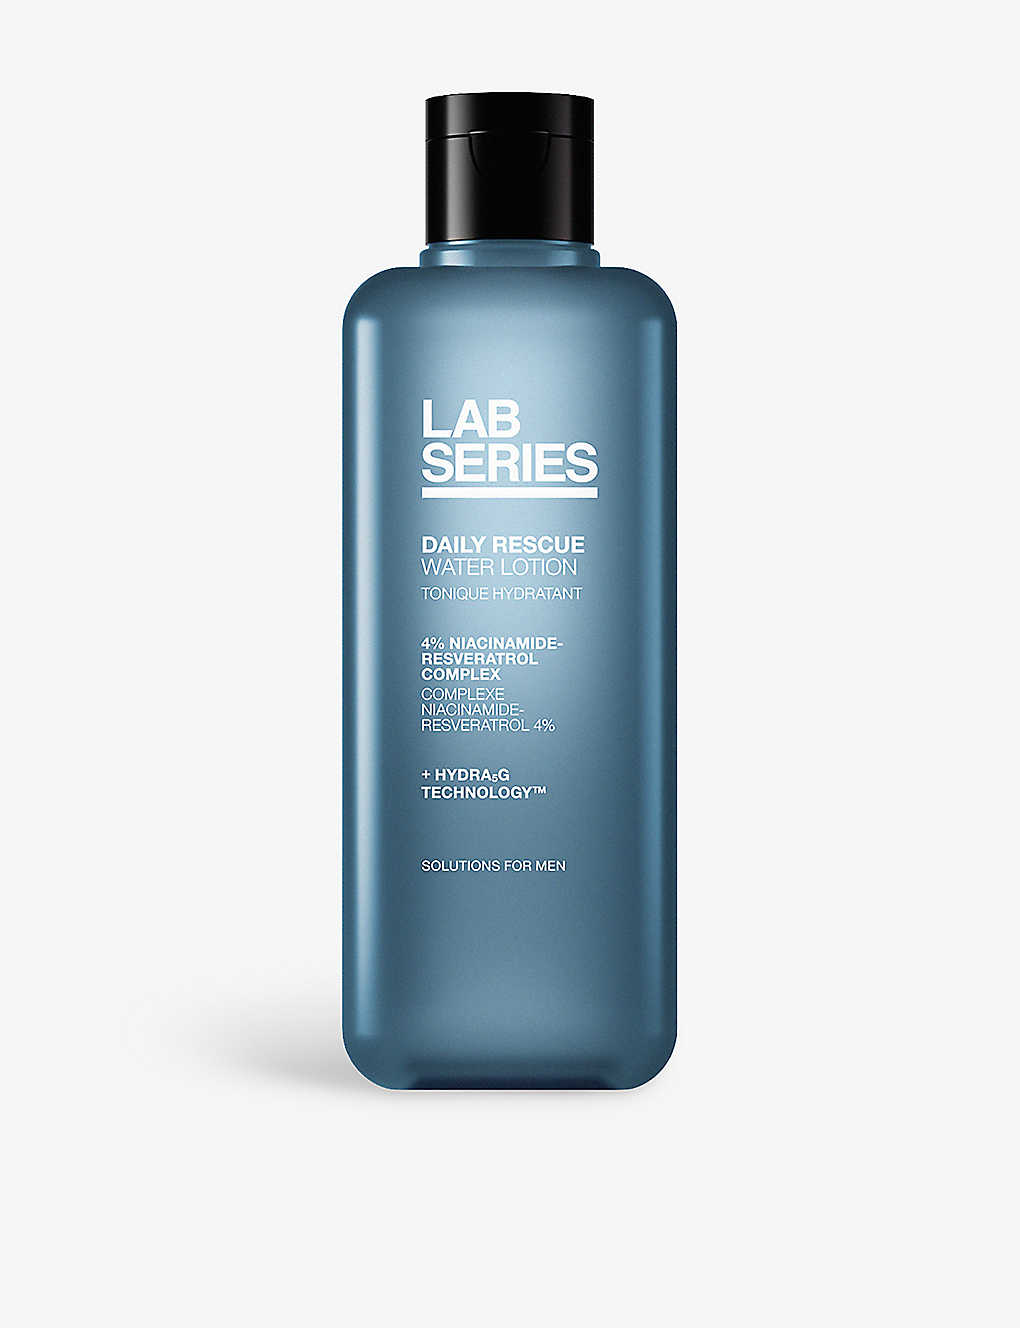 LAB SERIES LAB SERIES DAILY RESCUE WATER LOTION